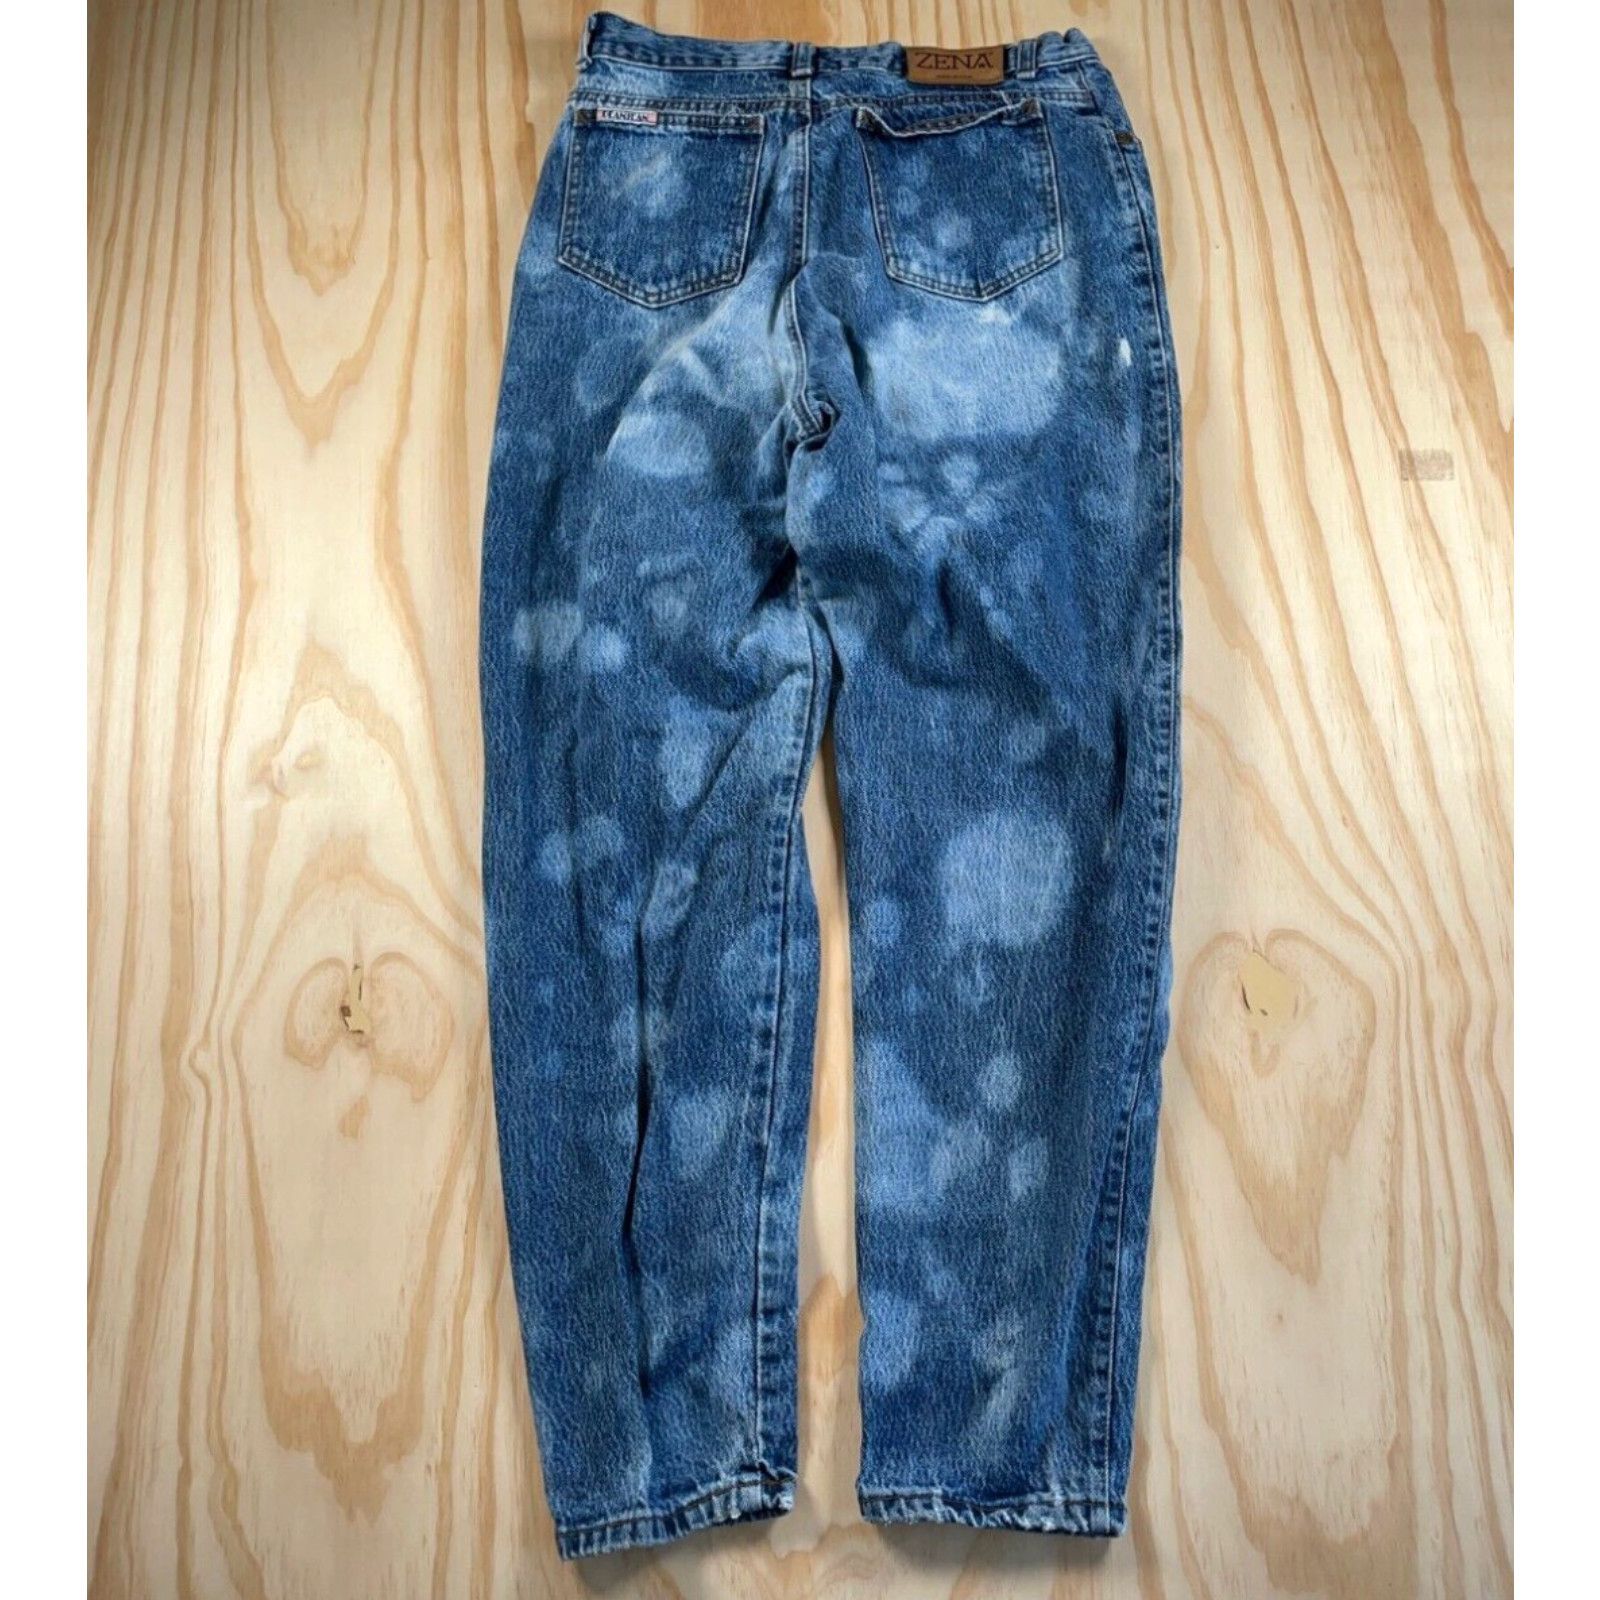 Vintage VTG 80s High Waisted Bleached Mom Jeans Women's 30 x 30 Blue Denim Zena Tapered Size ONE SIZE - 1 Preview